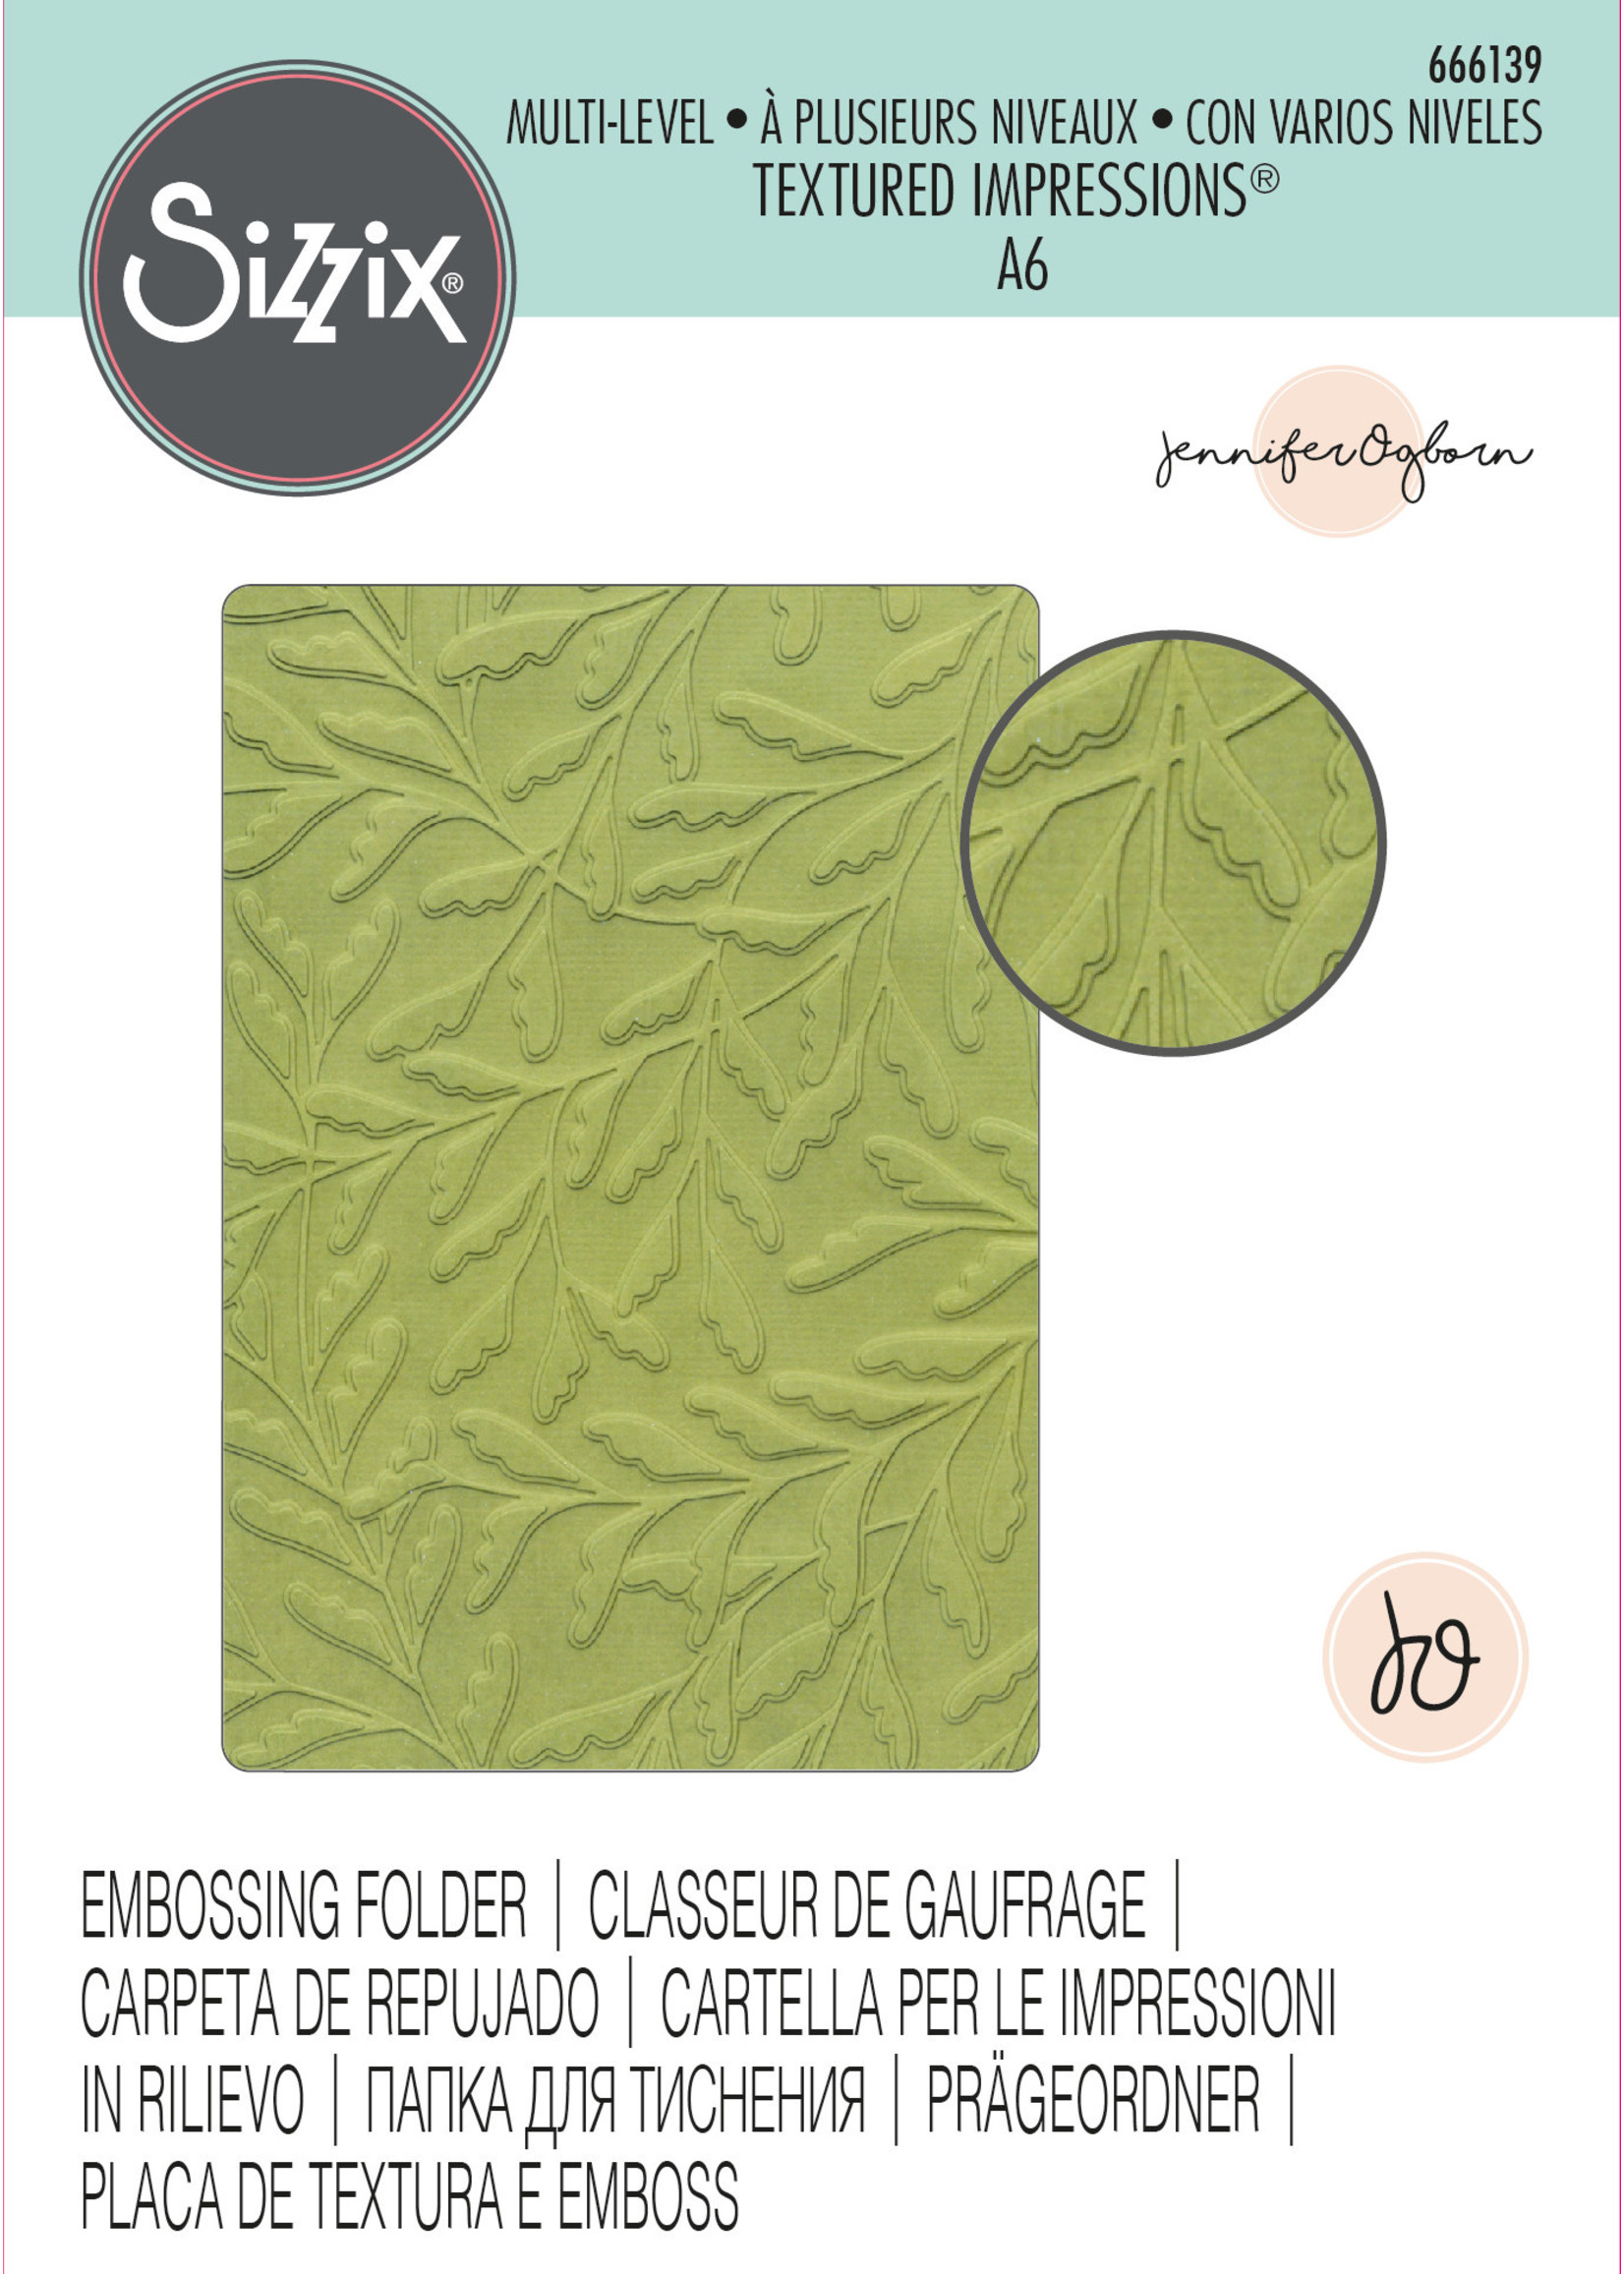 Sizzix Sizzix® Multi-Level Textured Impressions® Embossing Folder - Delicate Leaves by Jennifer Ogborn